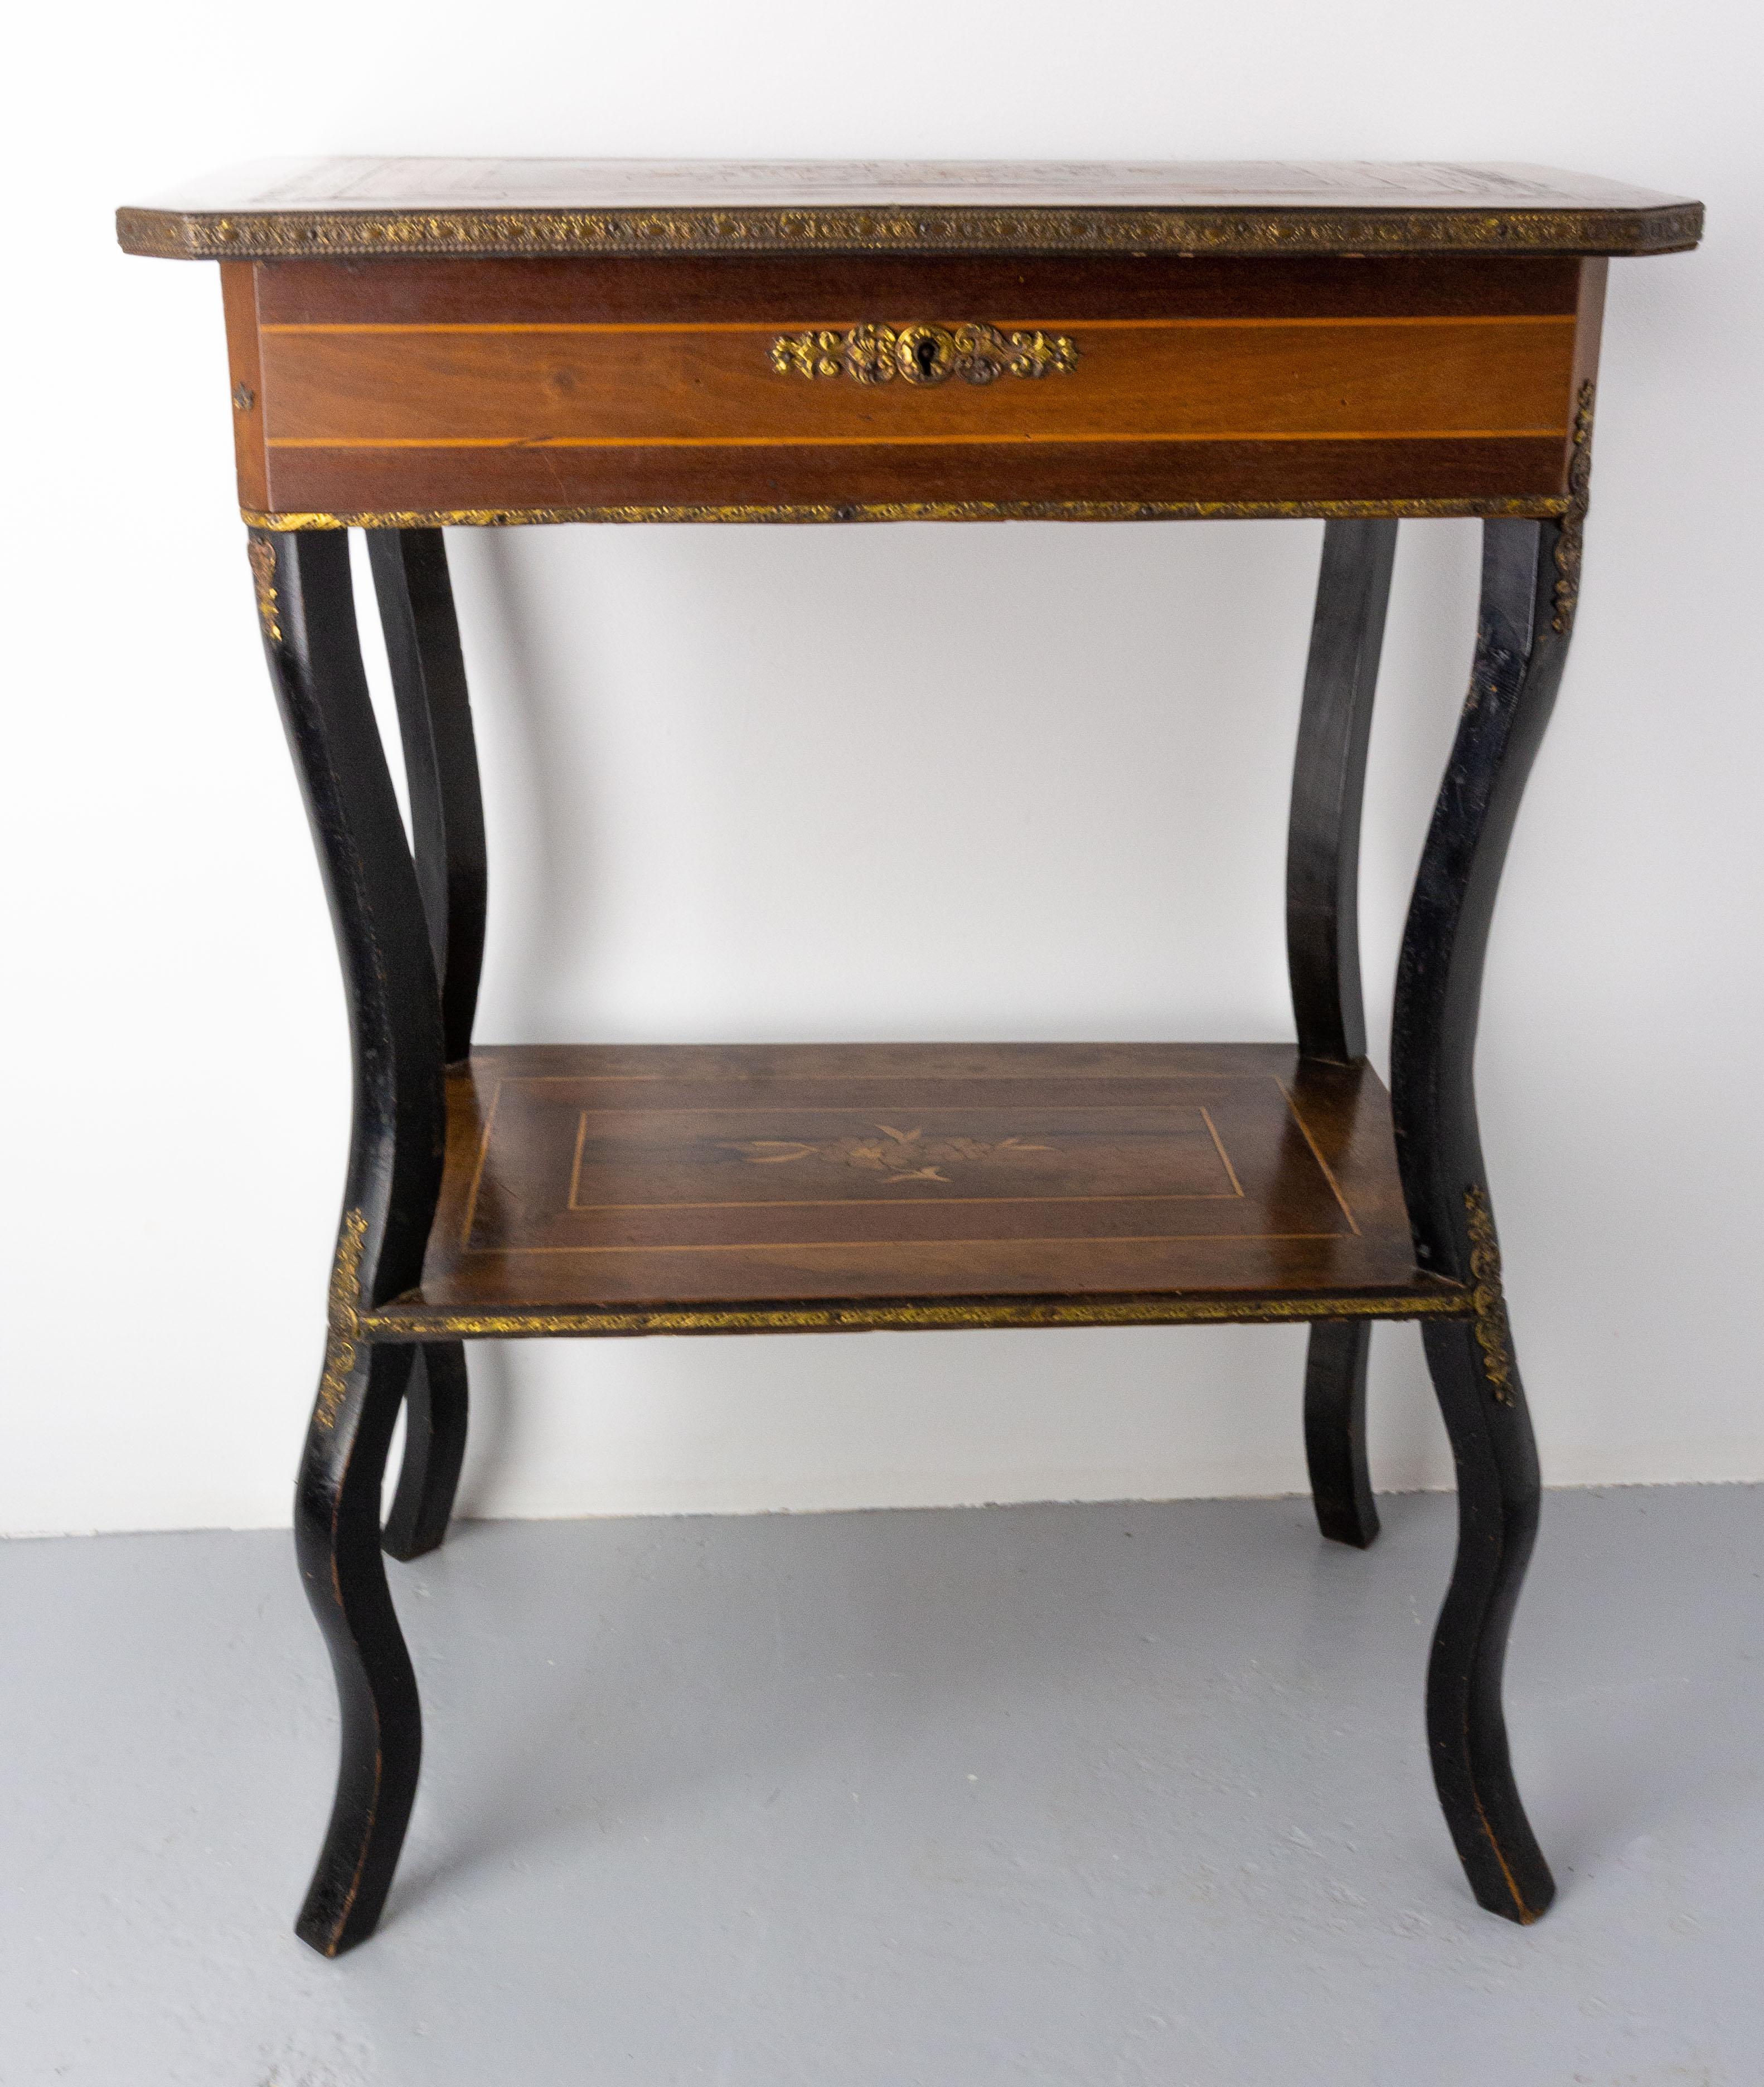 Antique Napoleon III sewing table, circa 1880
The marquetry is made of various woods.
A brass feast surrounds the table top.
The lift-up lid opens up to reveal an original mirror and compartments.

Good patina.
Good antique condition, with